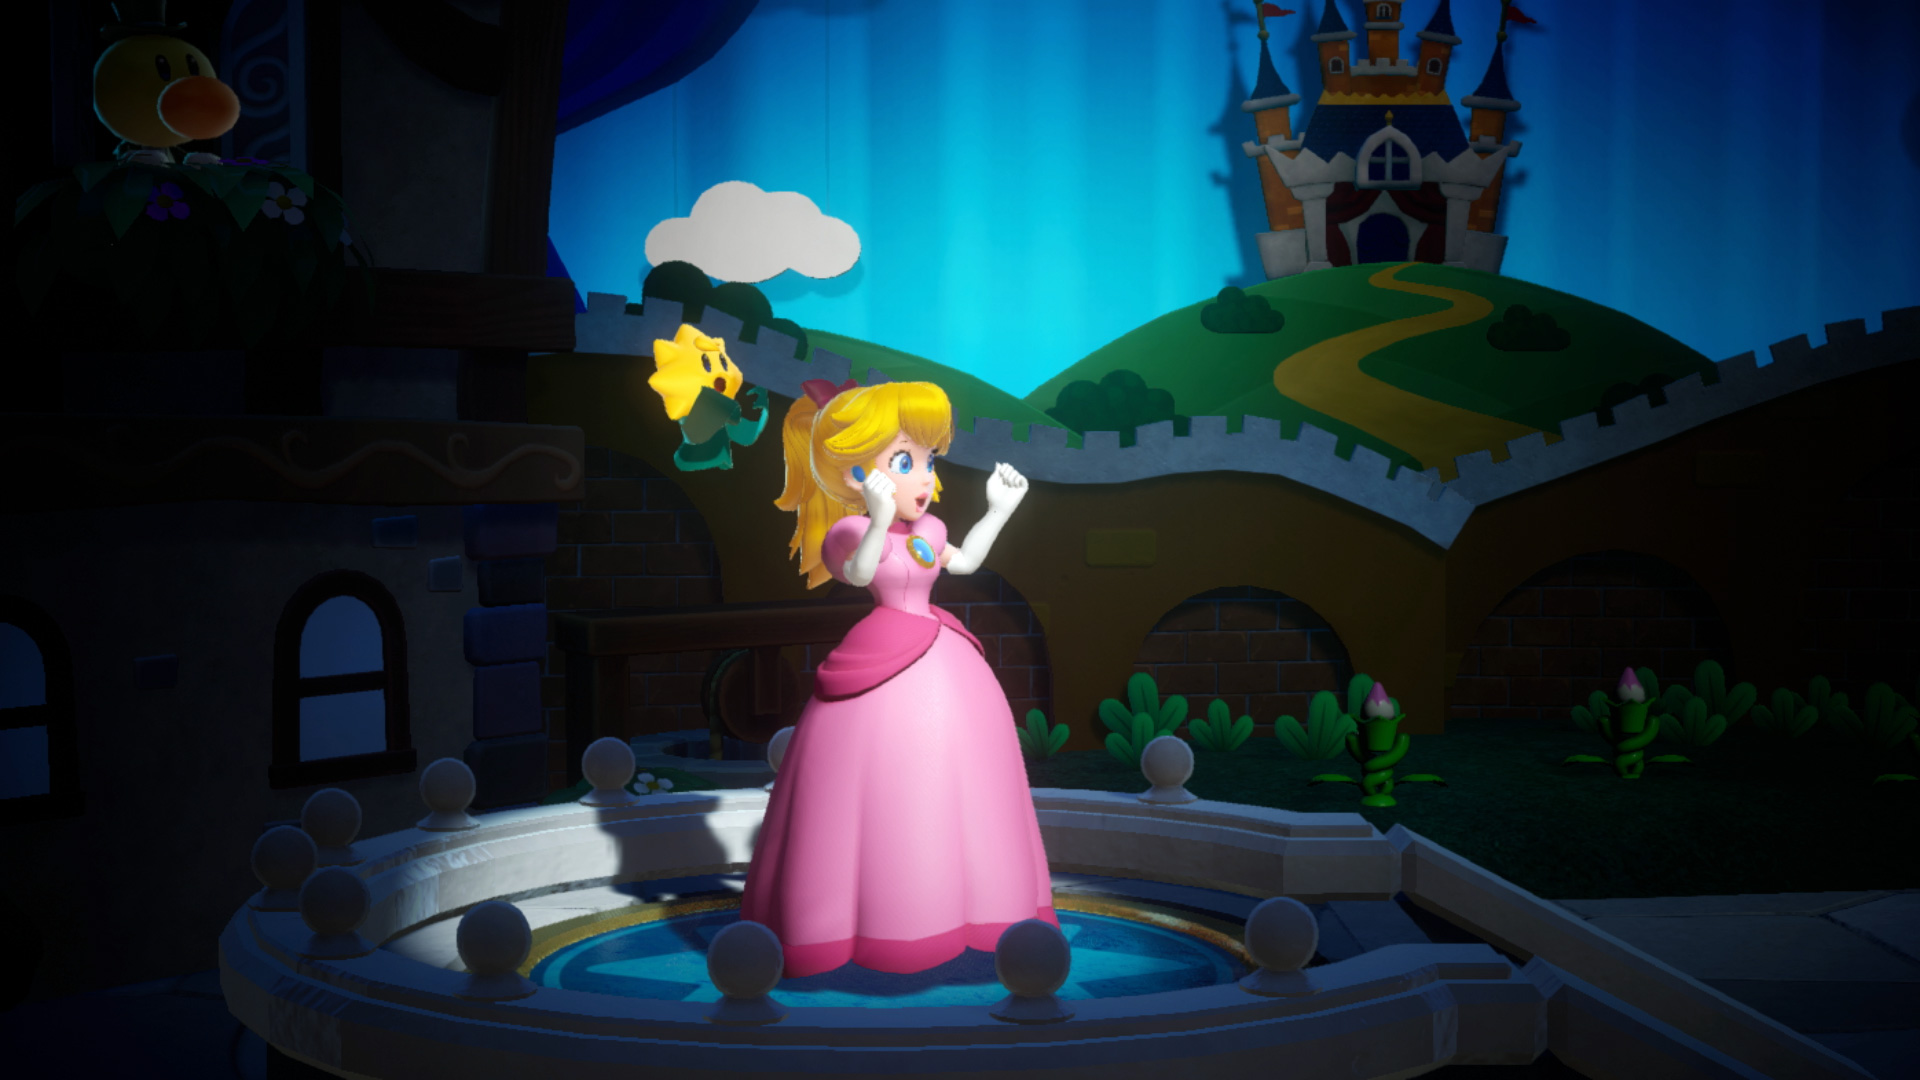 The Princess Peach game is set to release sometime next year